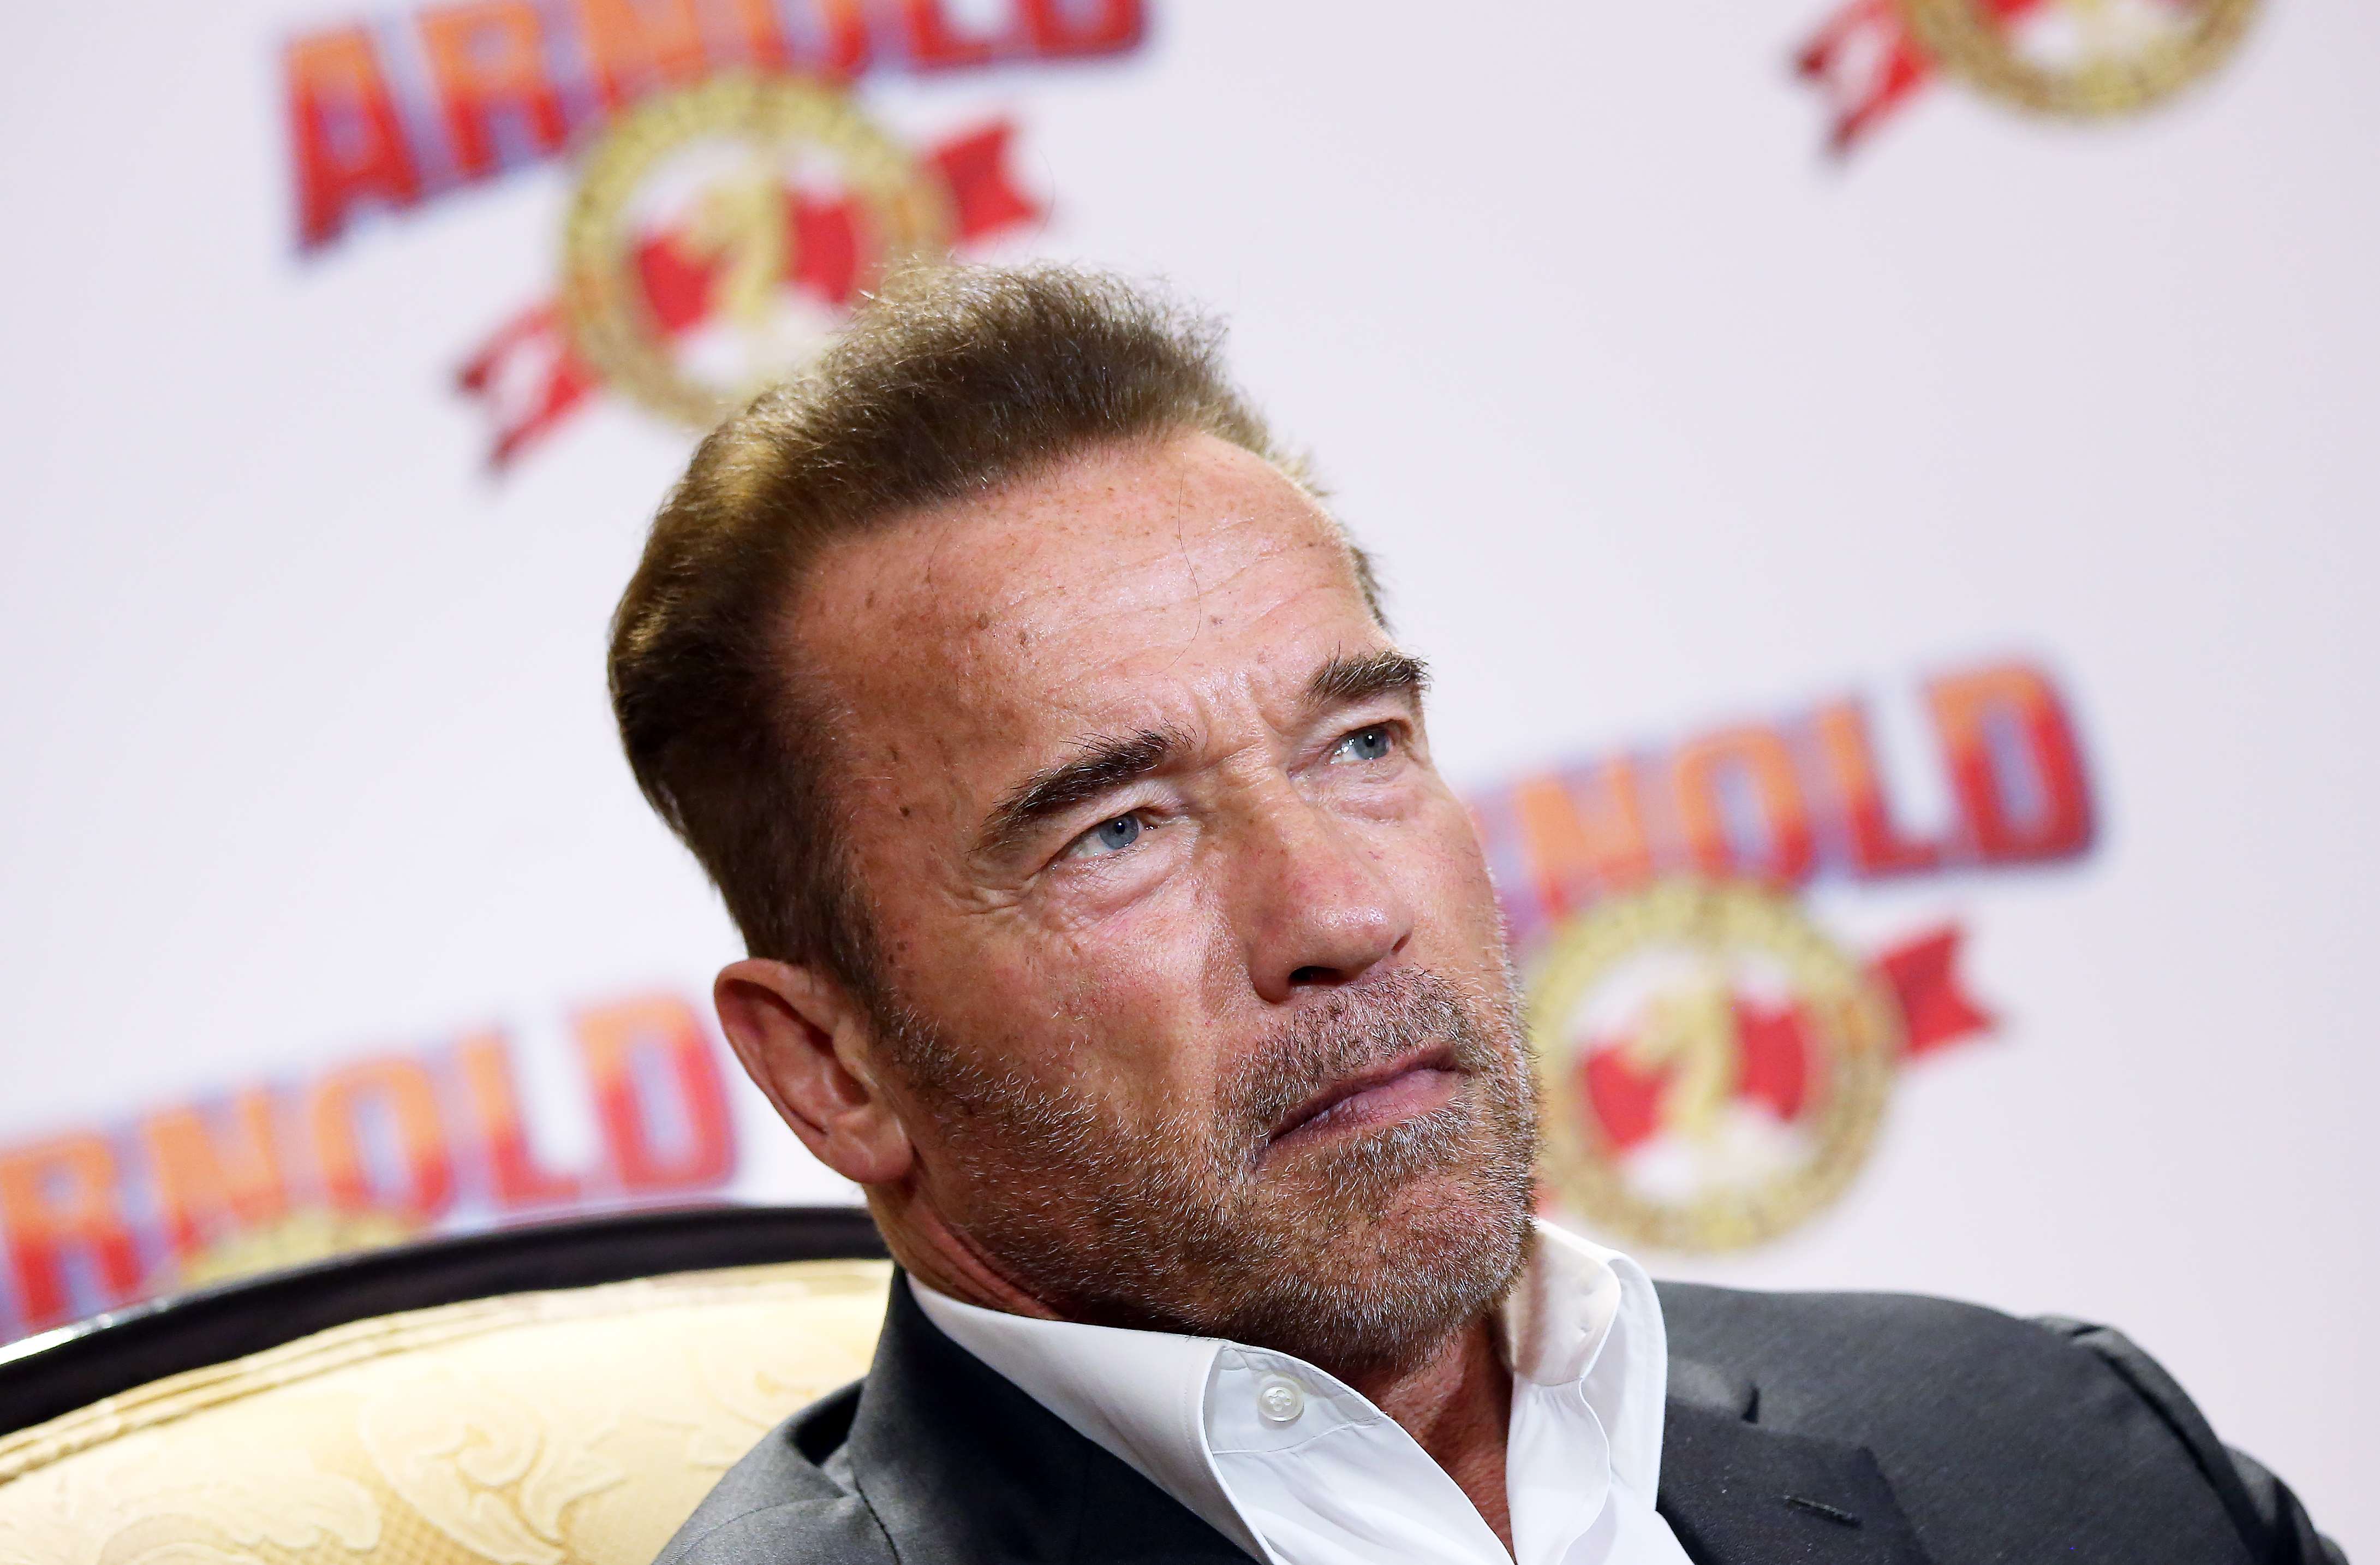 US actor and former California governor Arnold Schwarzenegger at a press conference ahead of the Arnold Classic Asia Multi-Sport Festival. Photo: K. Y. Cheng